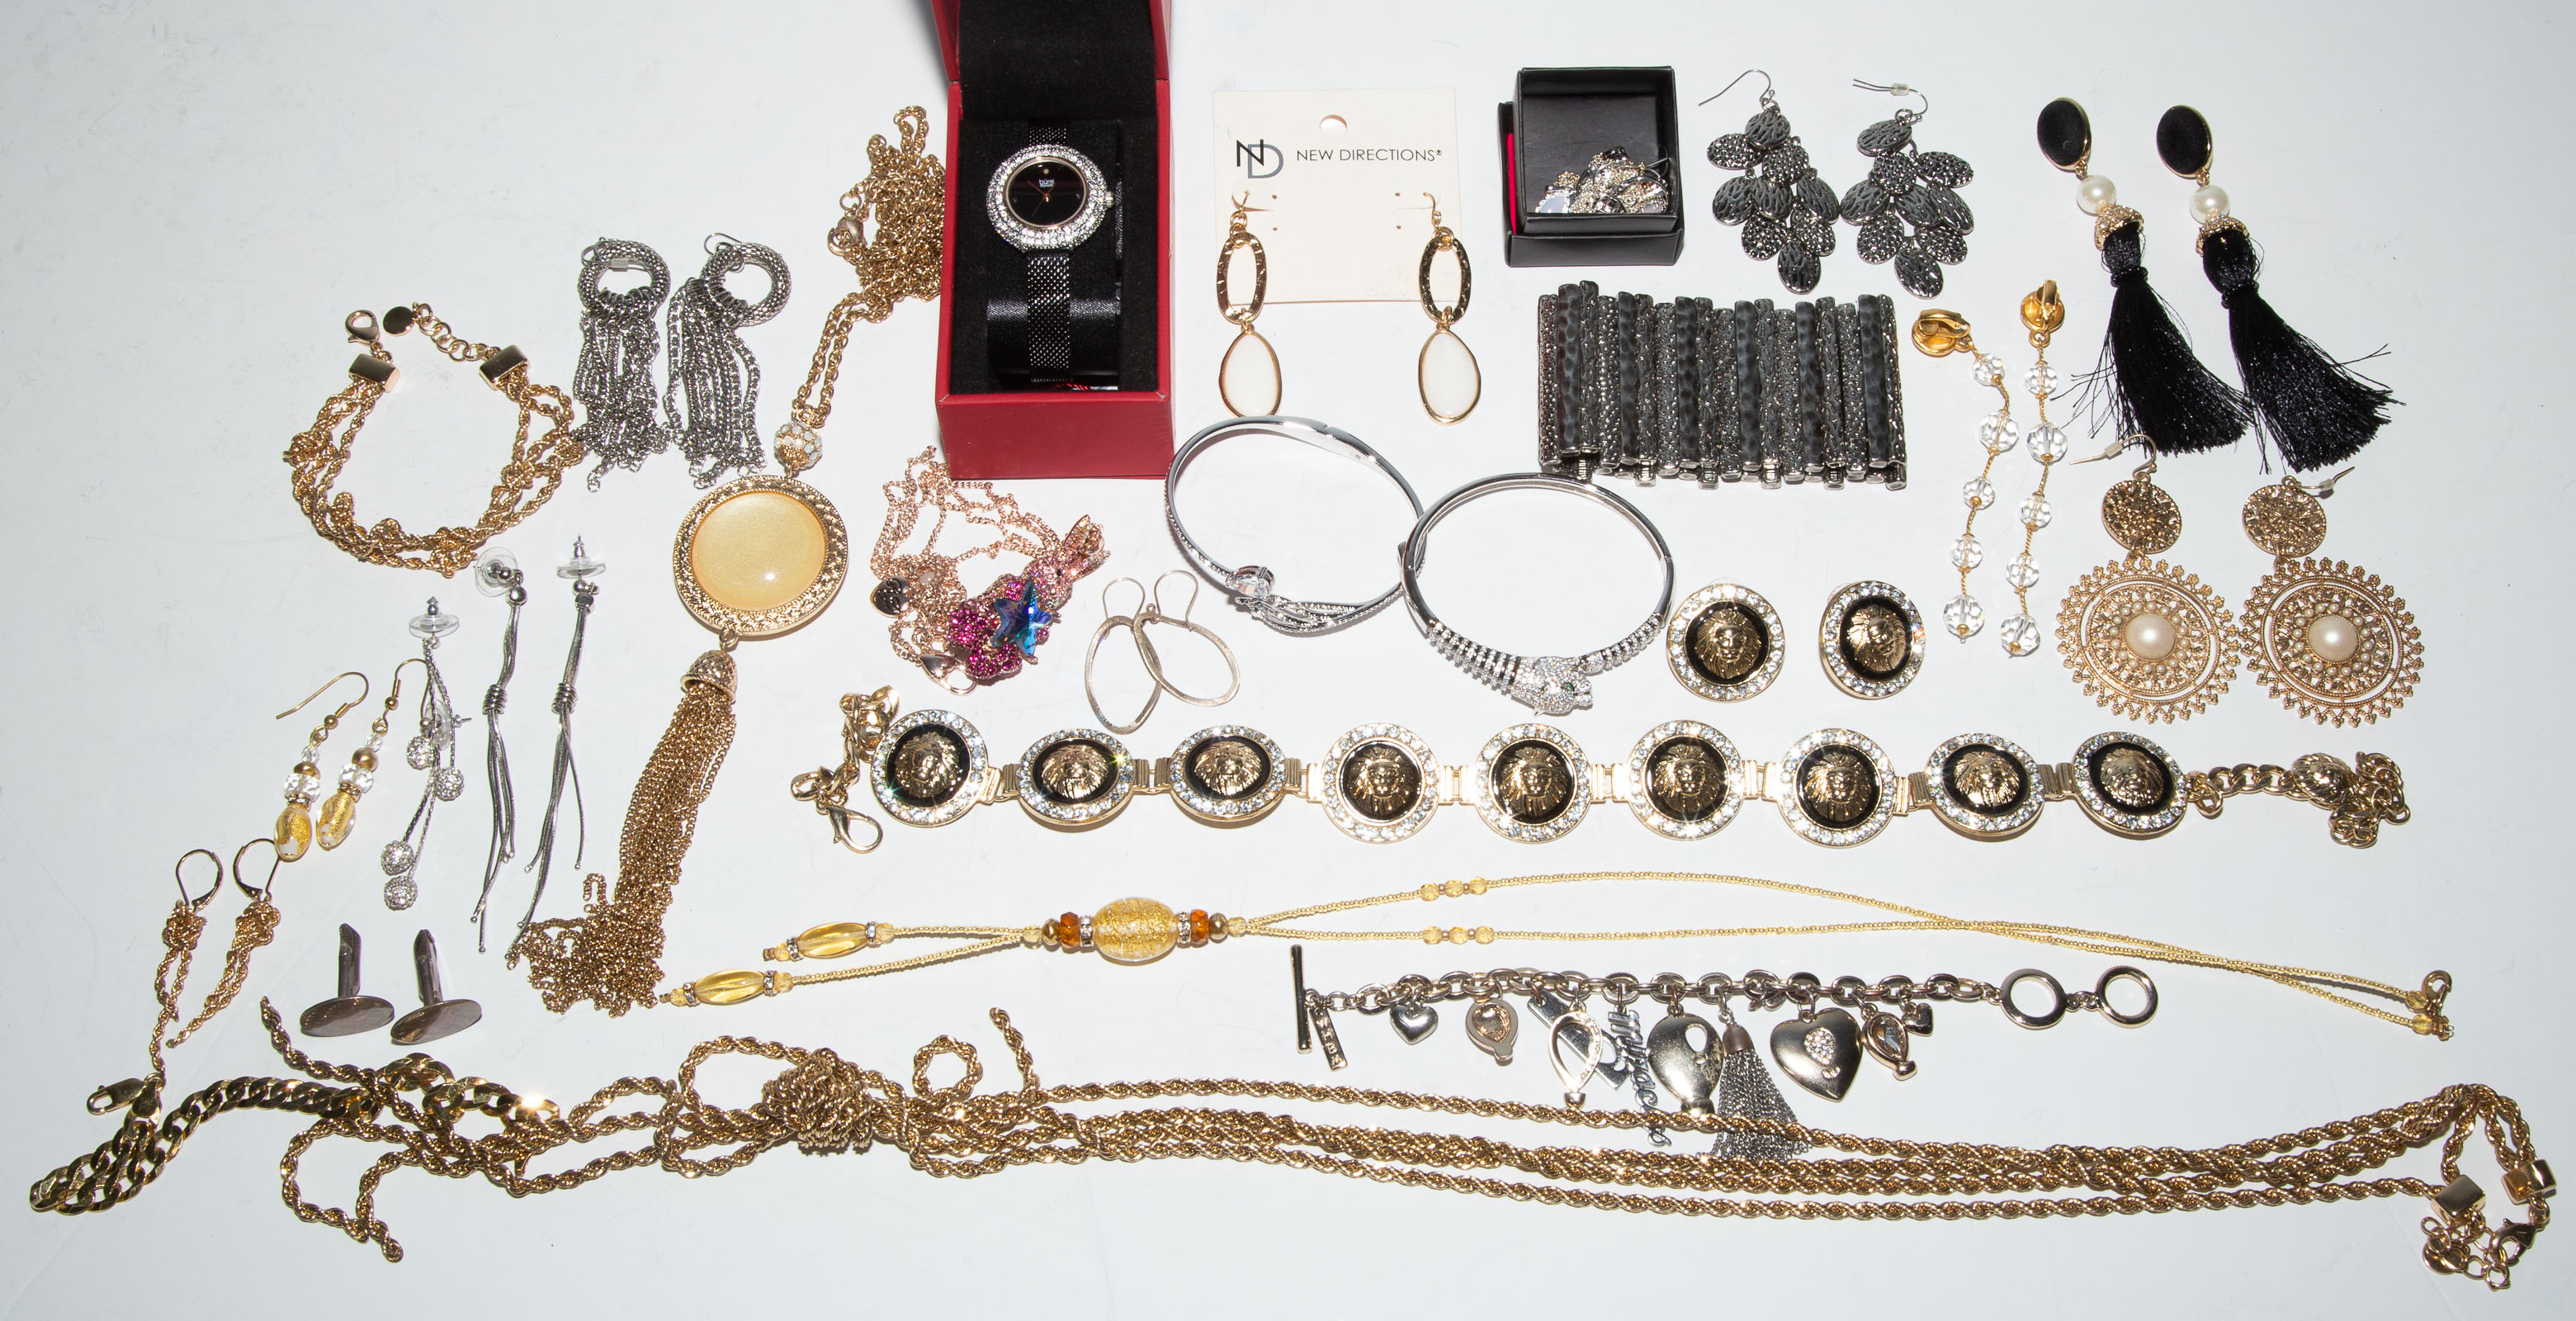 A COLLECTION OF FASHION JEWELRY